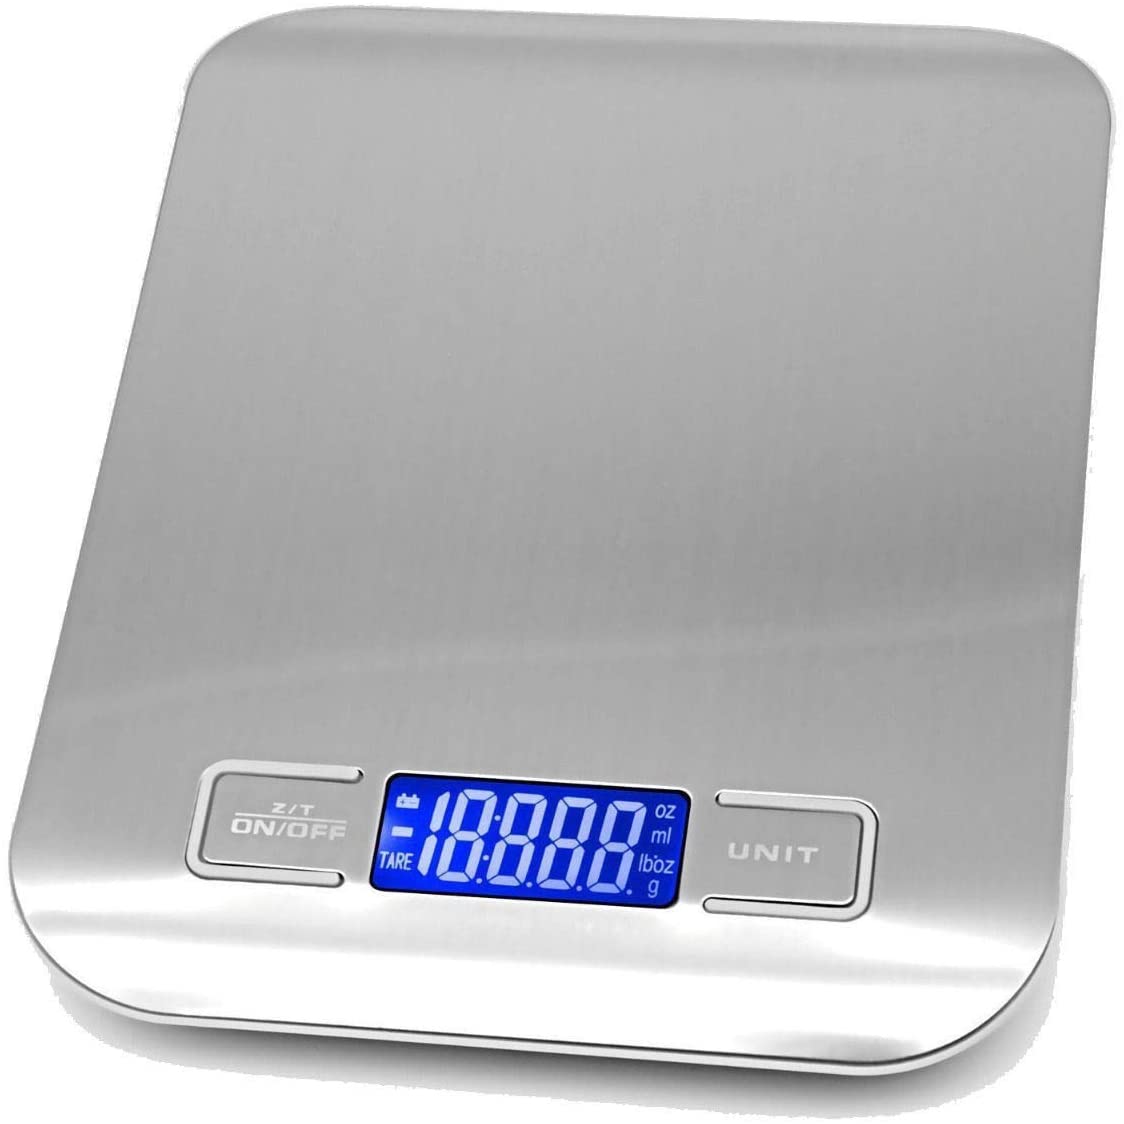 BEAUTE Silver Kitchen Scales